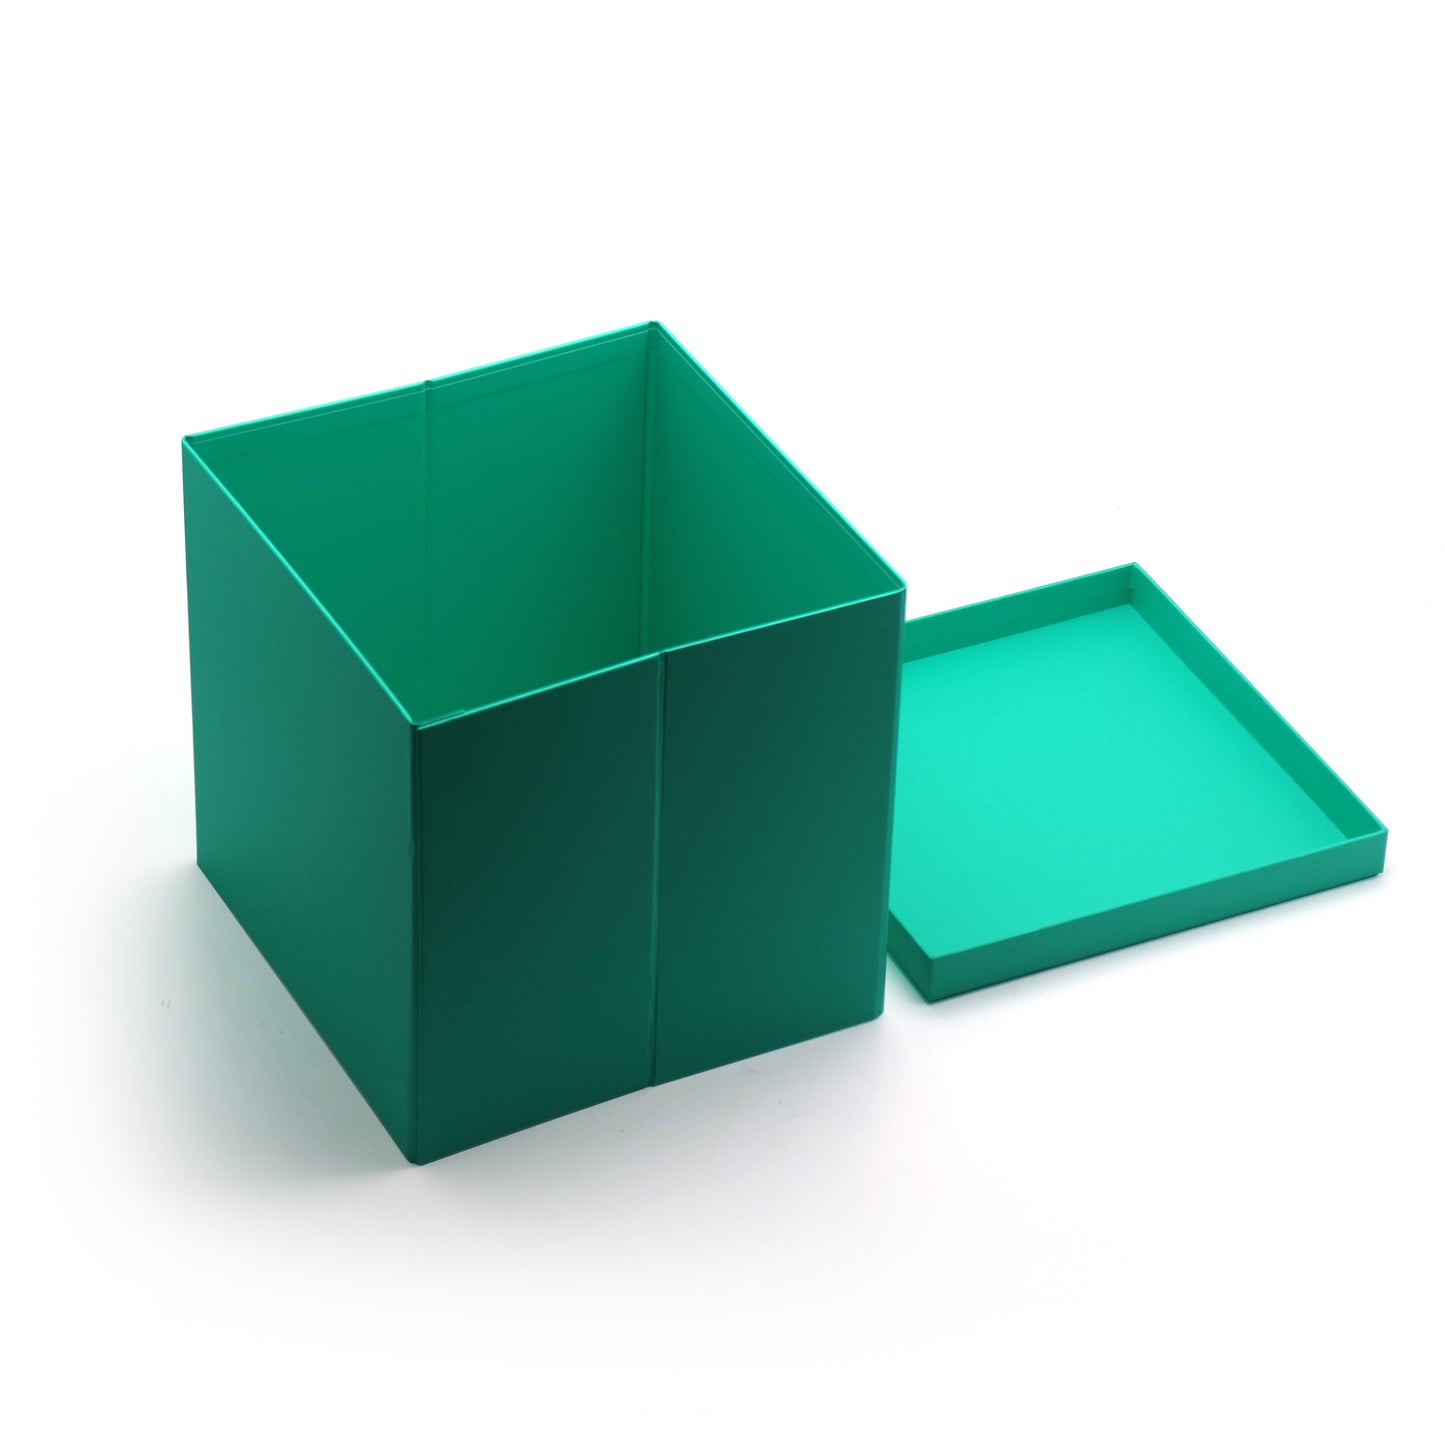 AVUX 9-inches Empty Gift Box with Lids and Ribbon- A Rigid Cardboard Green Colored Collapsible Gift Box for Birthday, Christmas, and Weddings